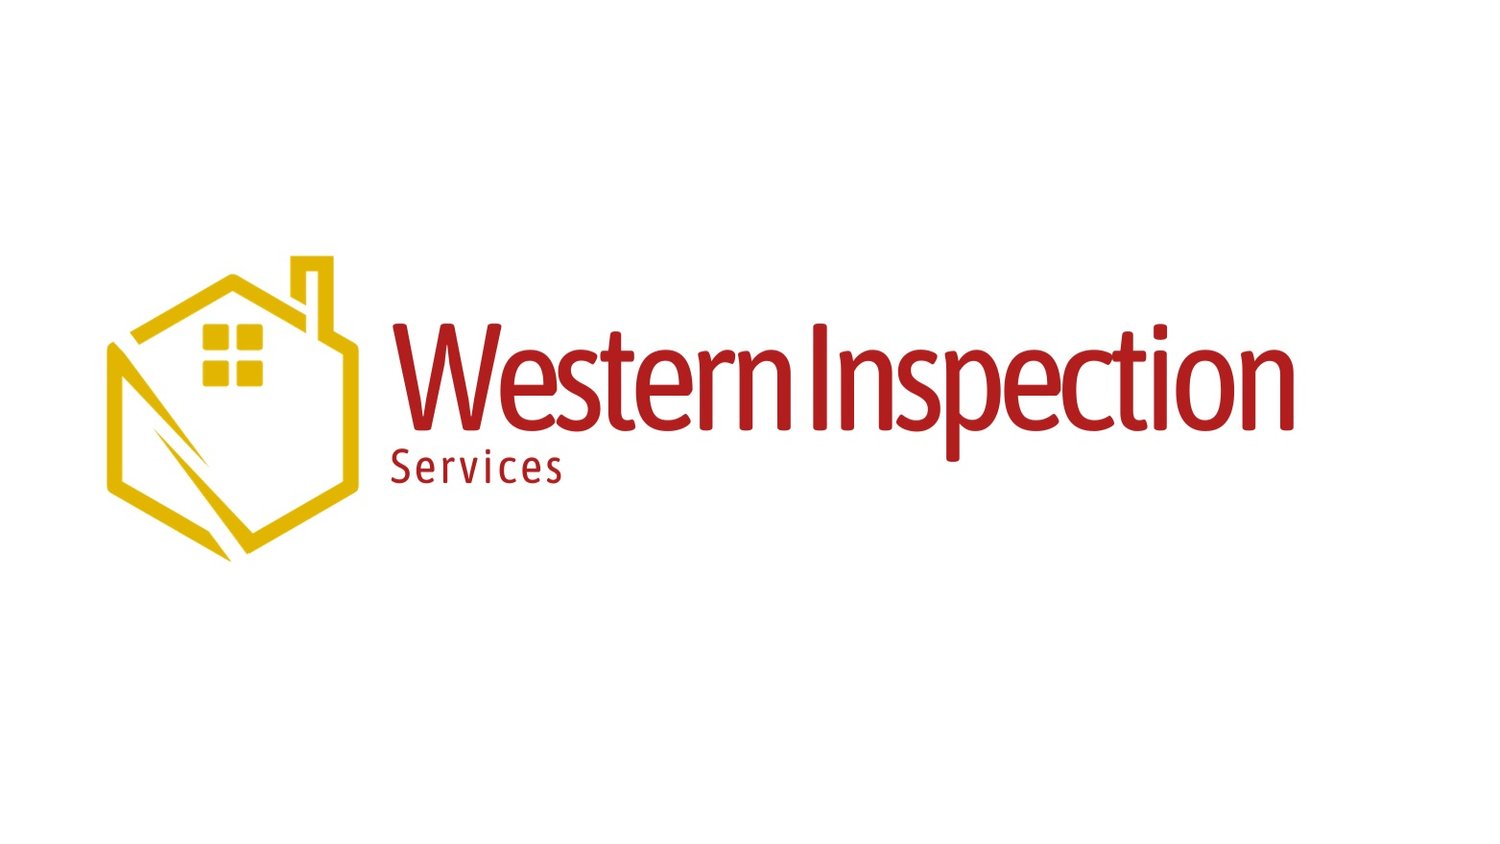 Western Inspection Services